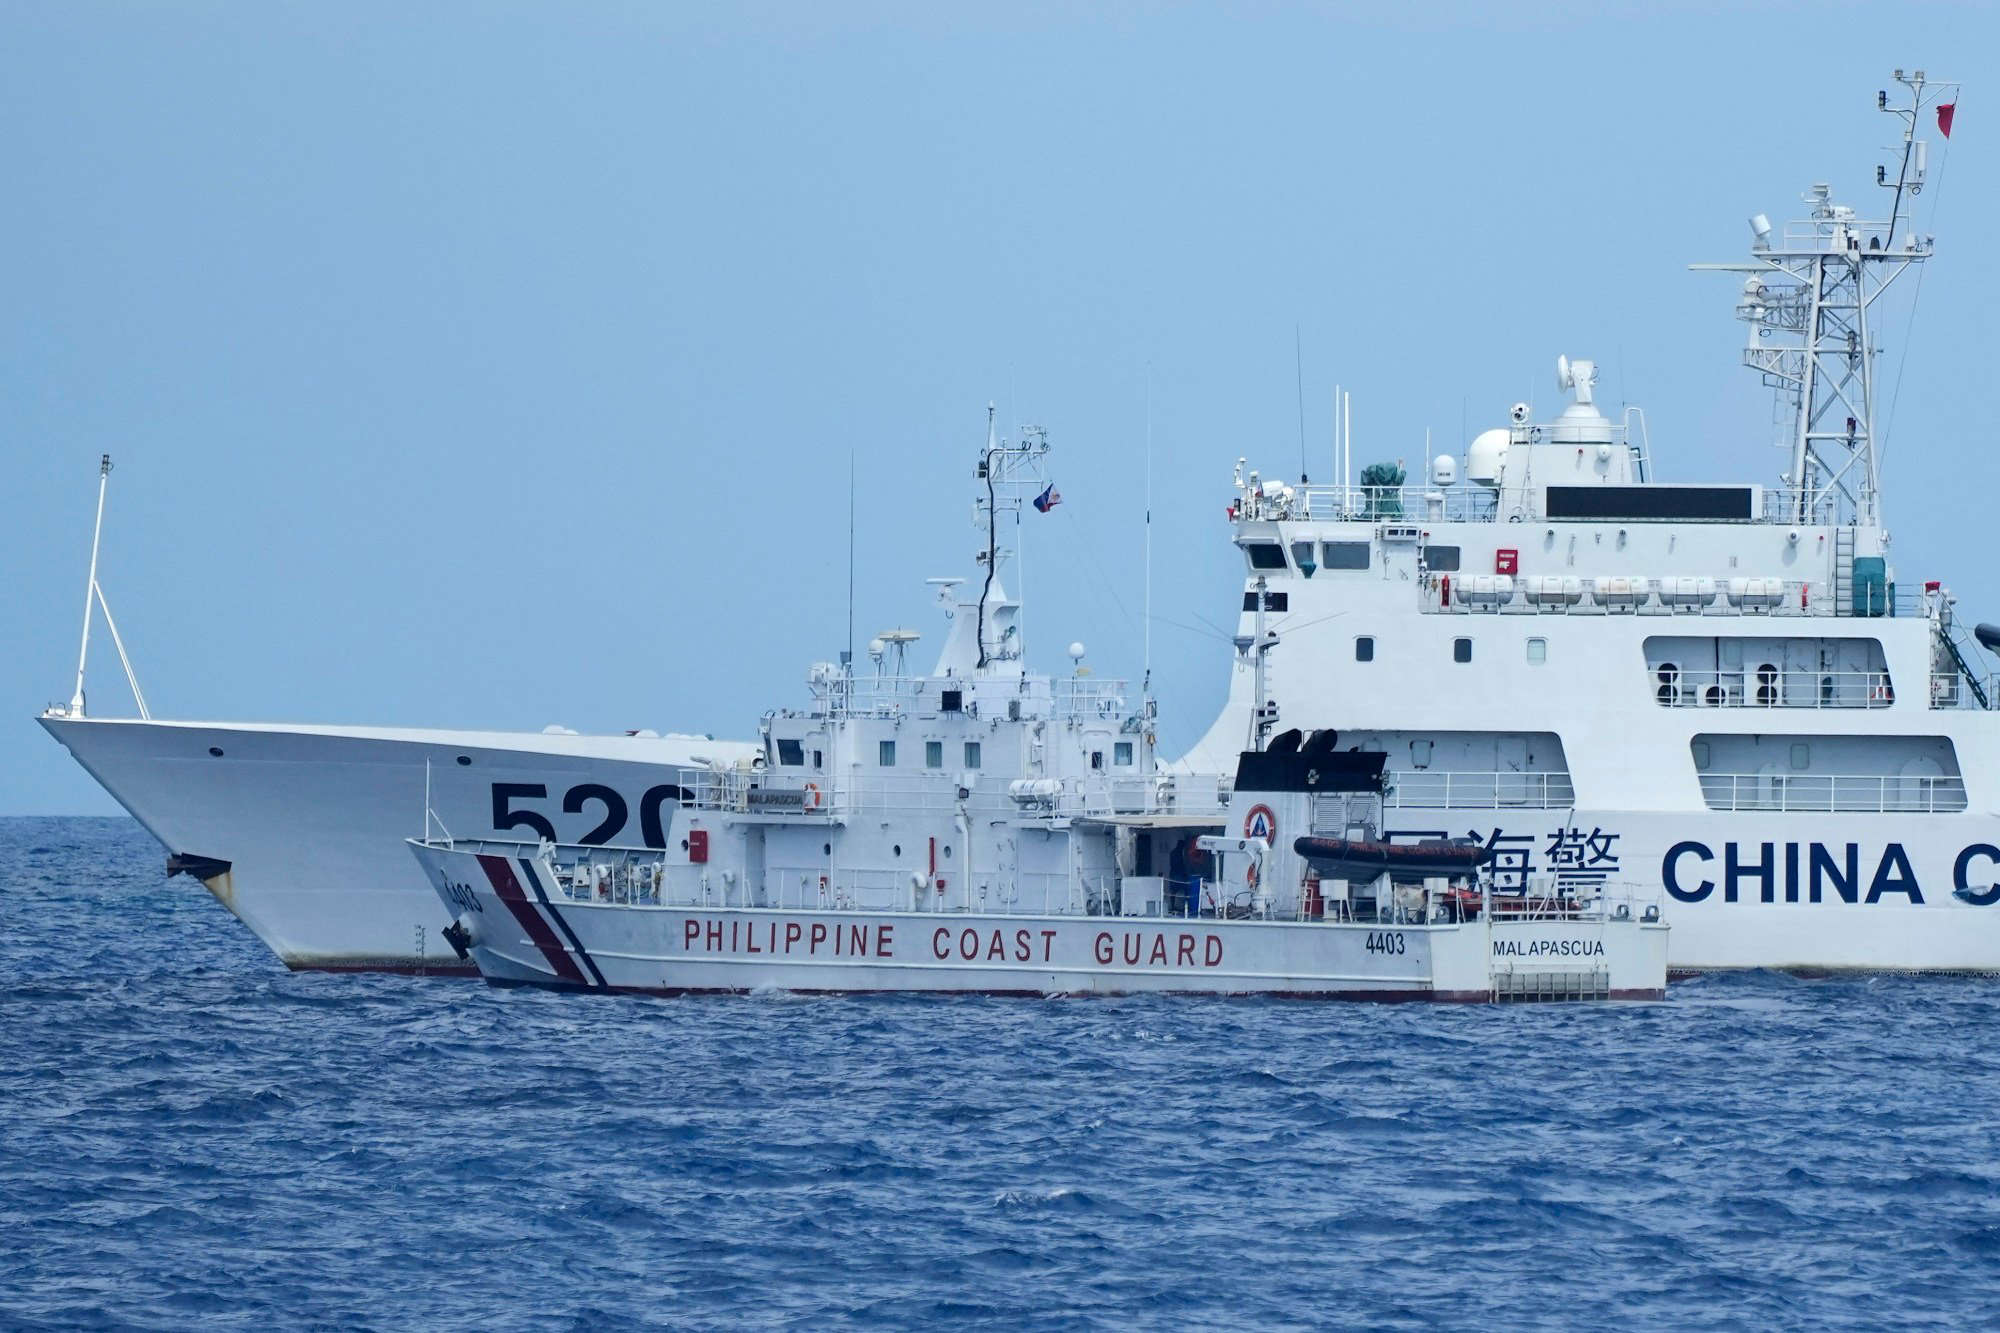 US and the Philippines are playing a dangerous game in the South China Sea